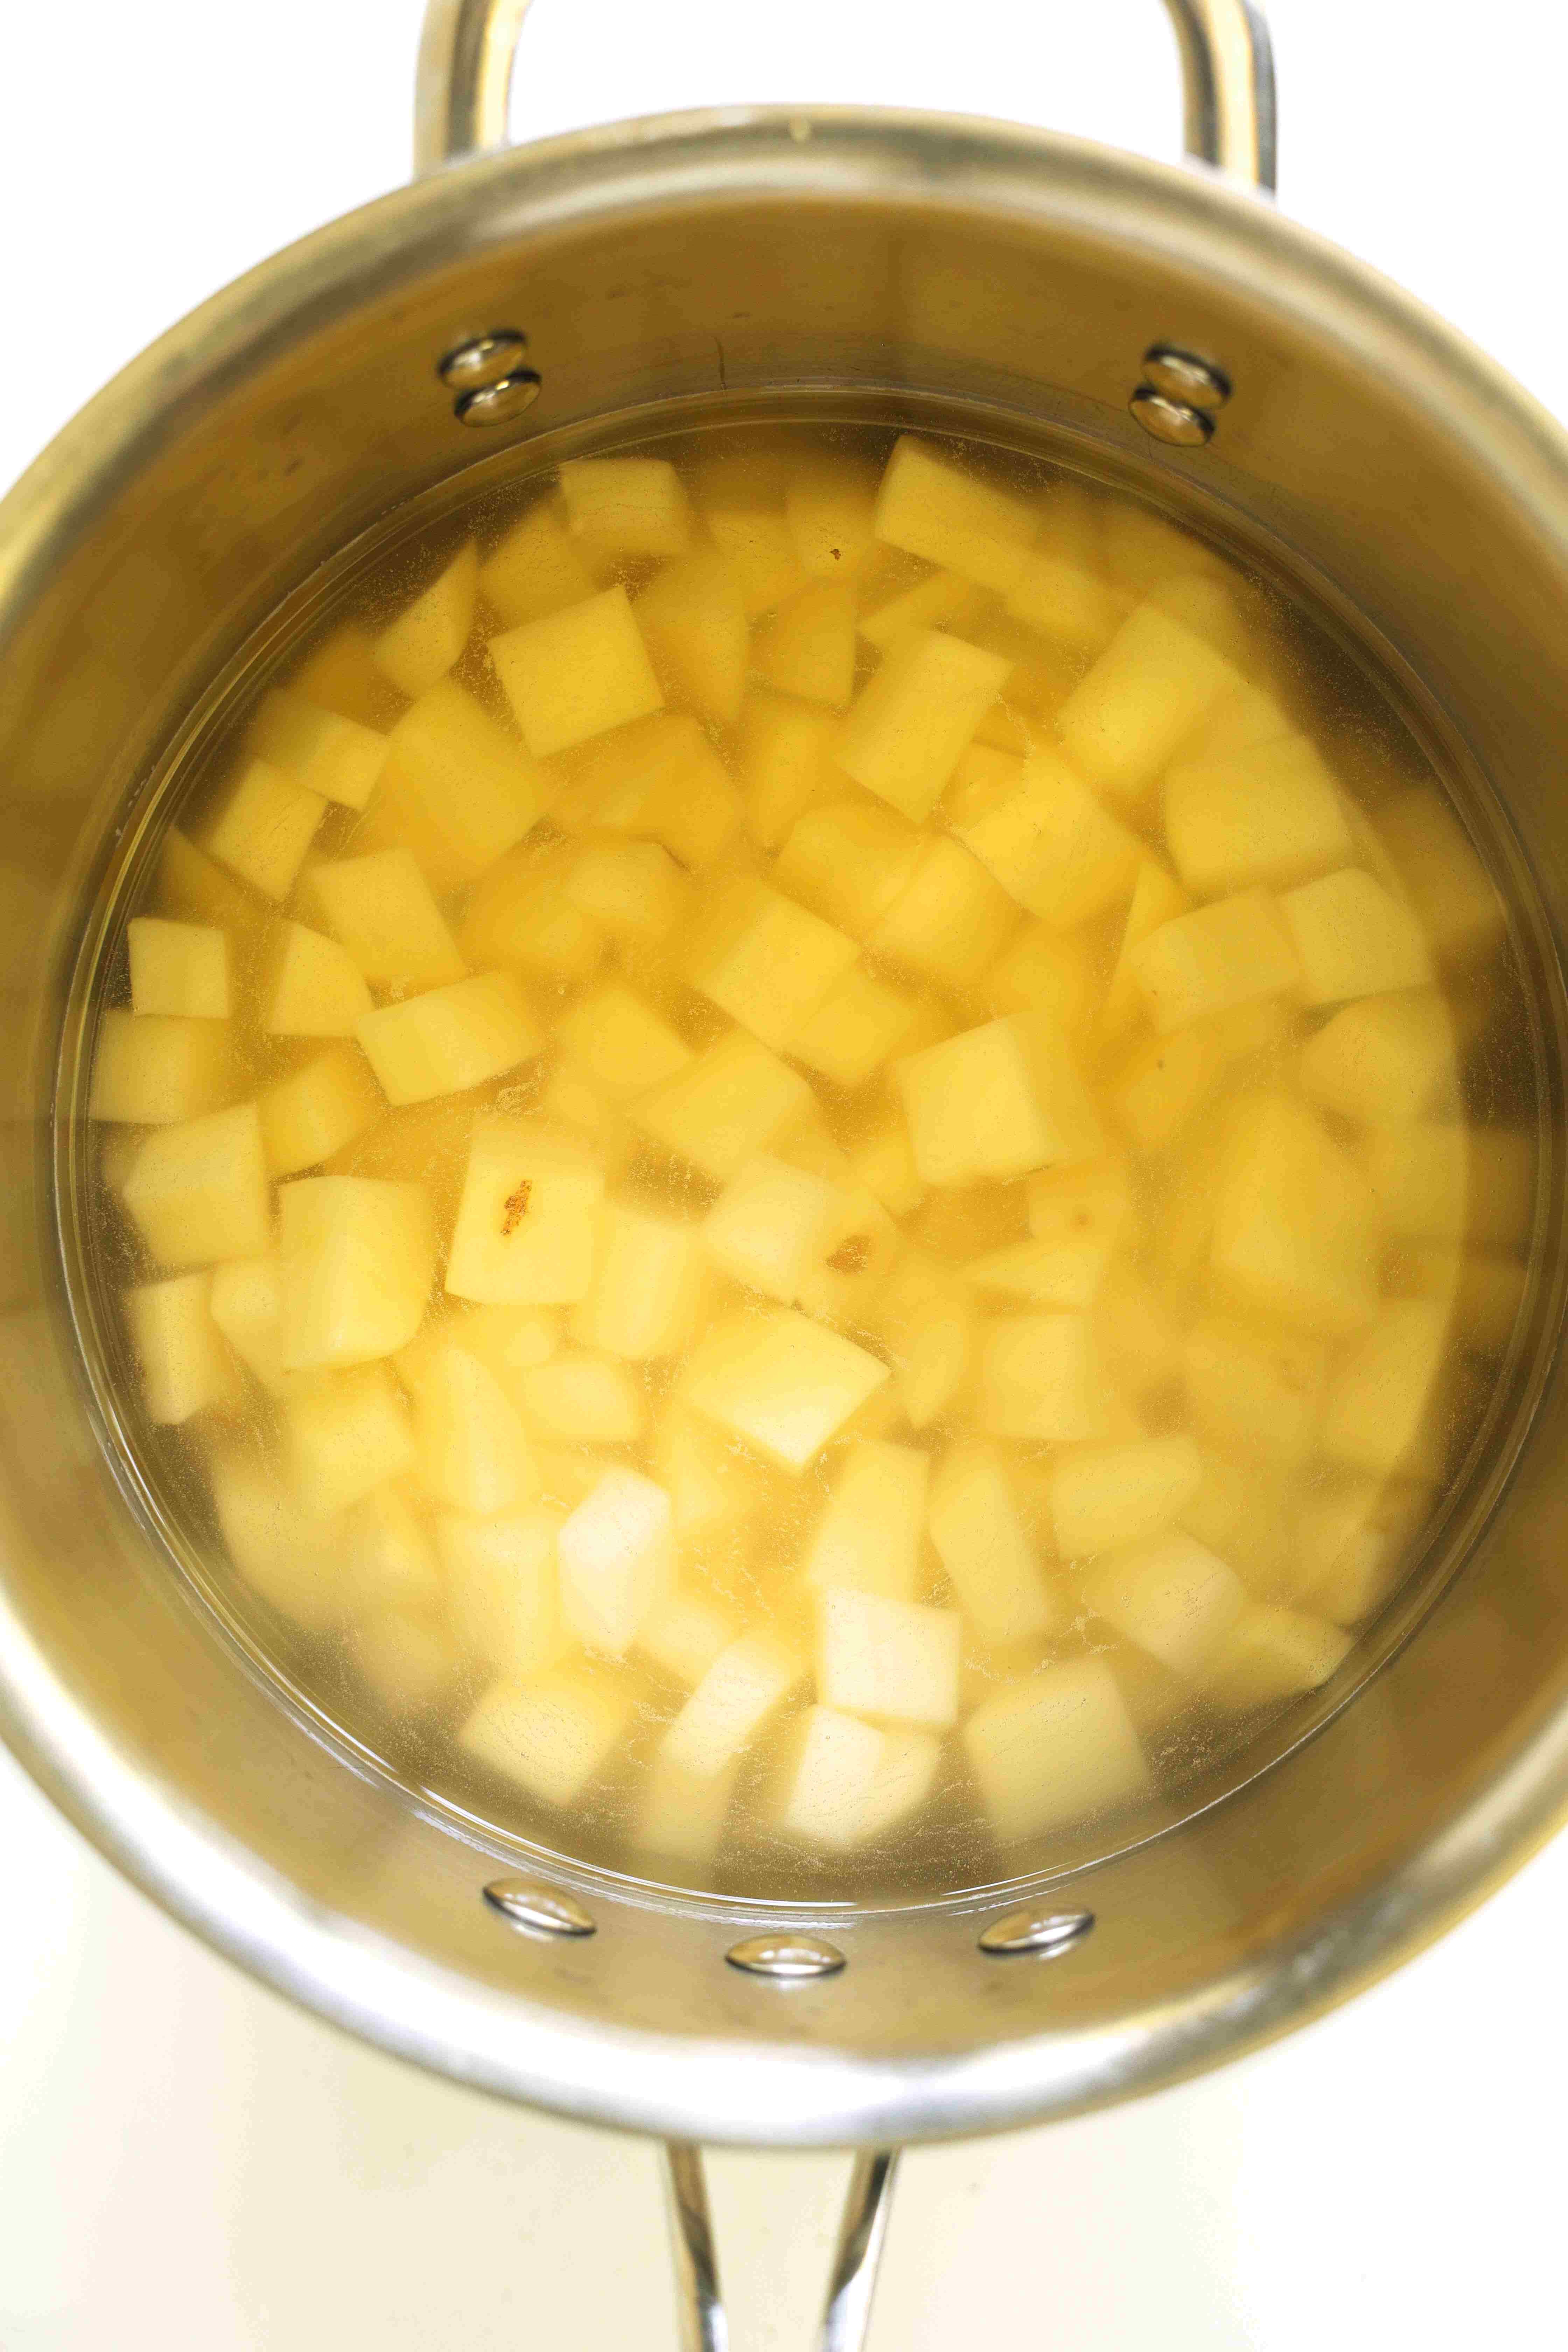 Diced potatoes covered in water, in a pot.